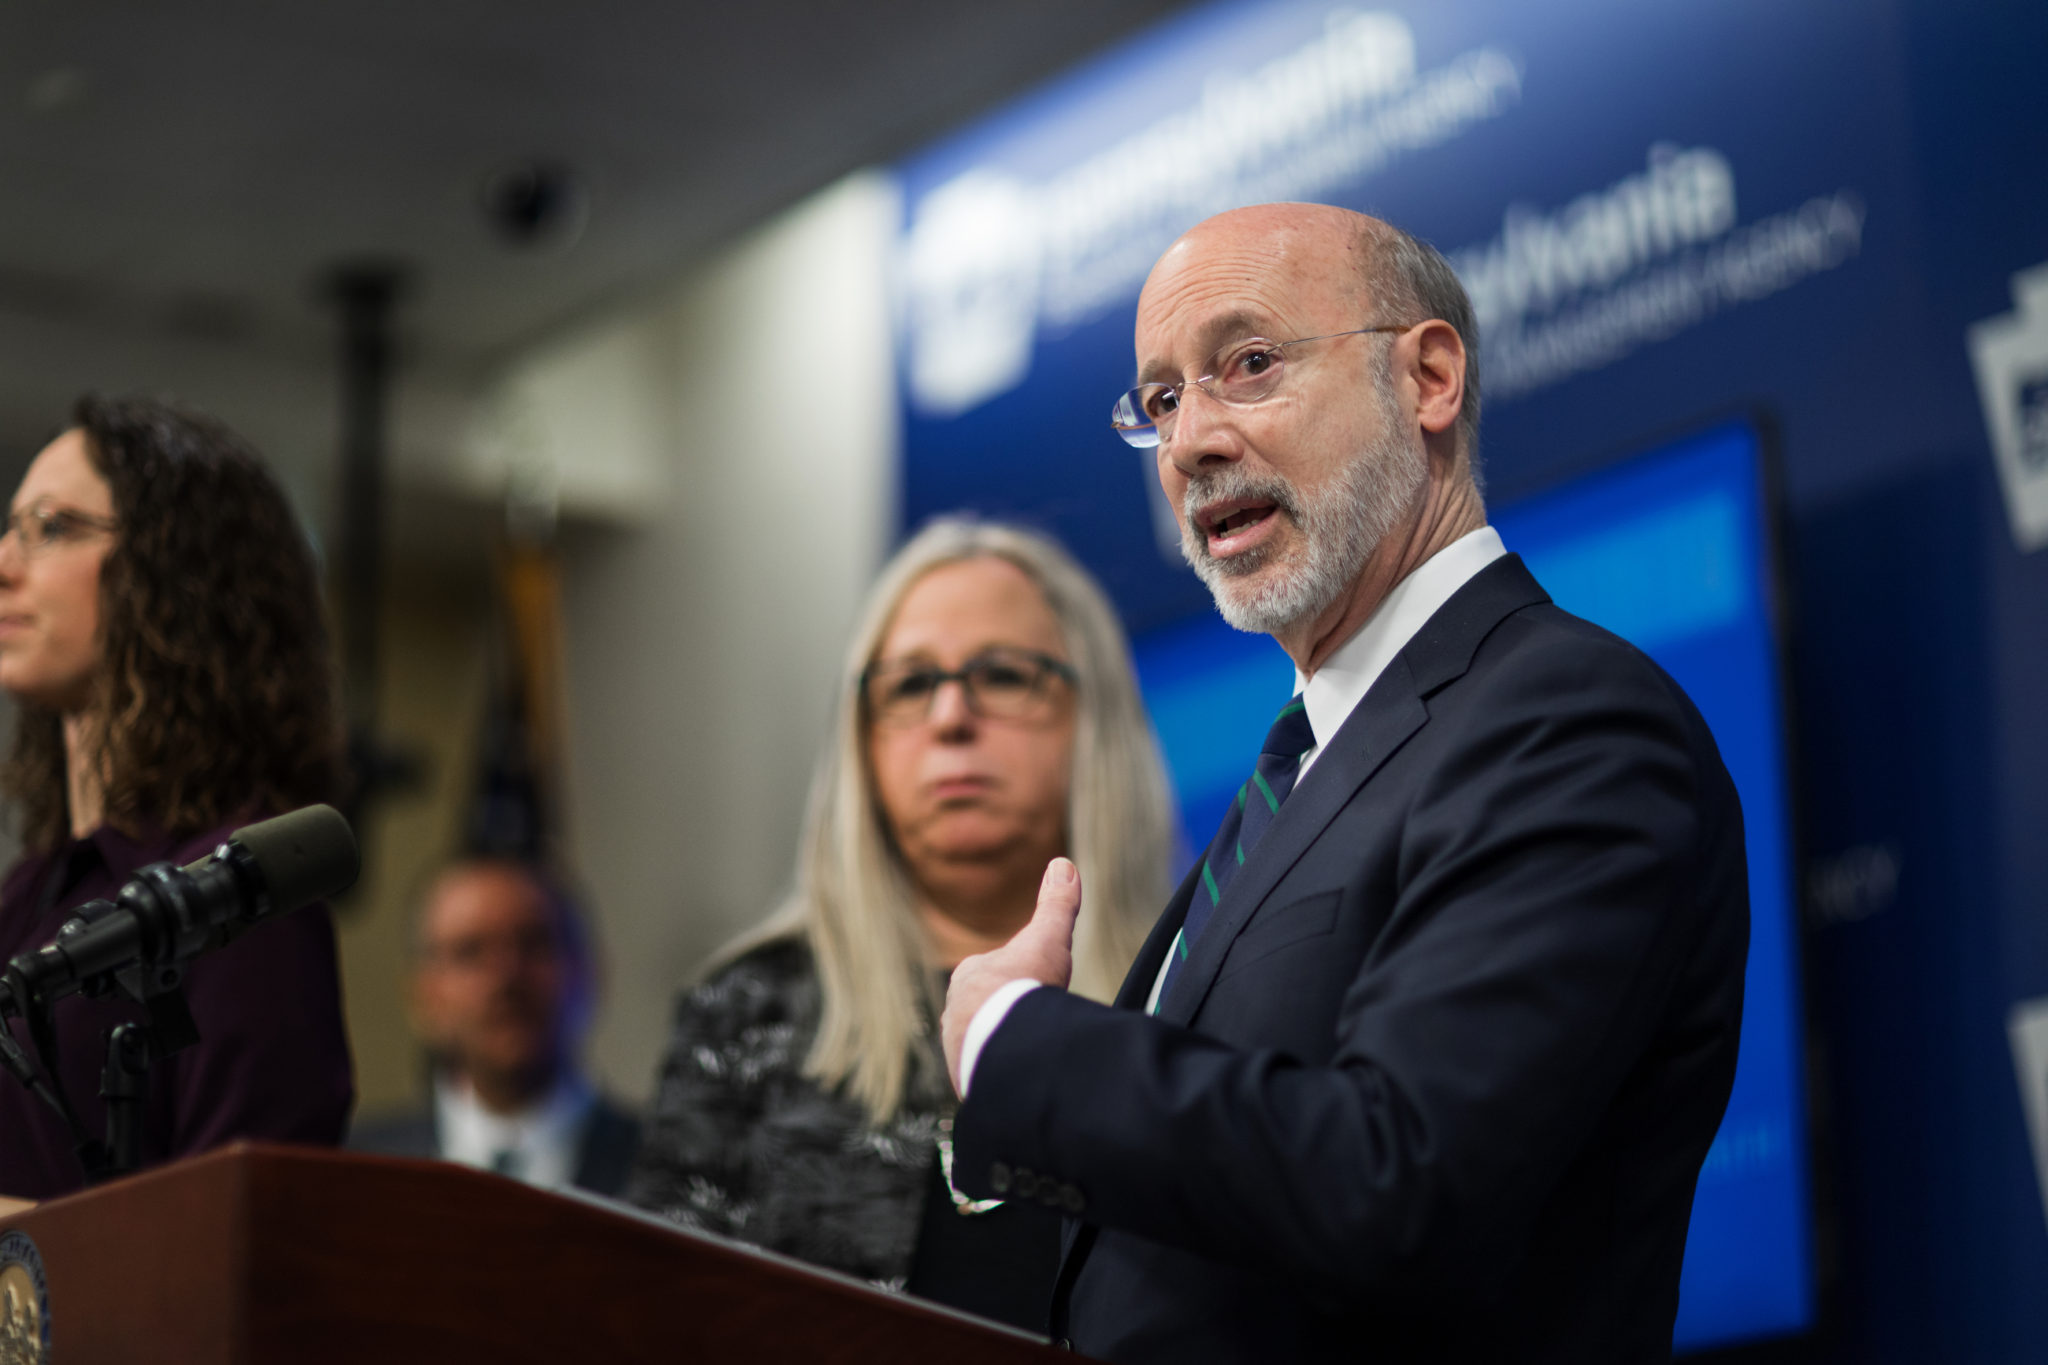 Gov. Wolf Says Tests Are Up; Levine Provides Insight On Reopening Plans